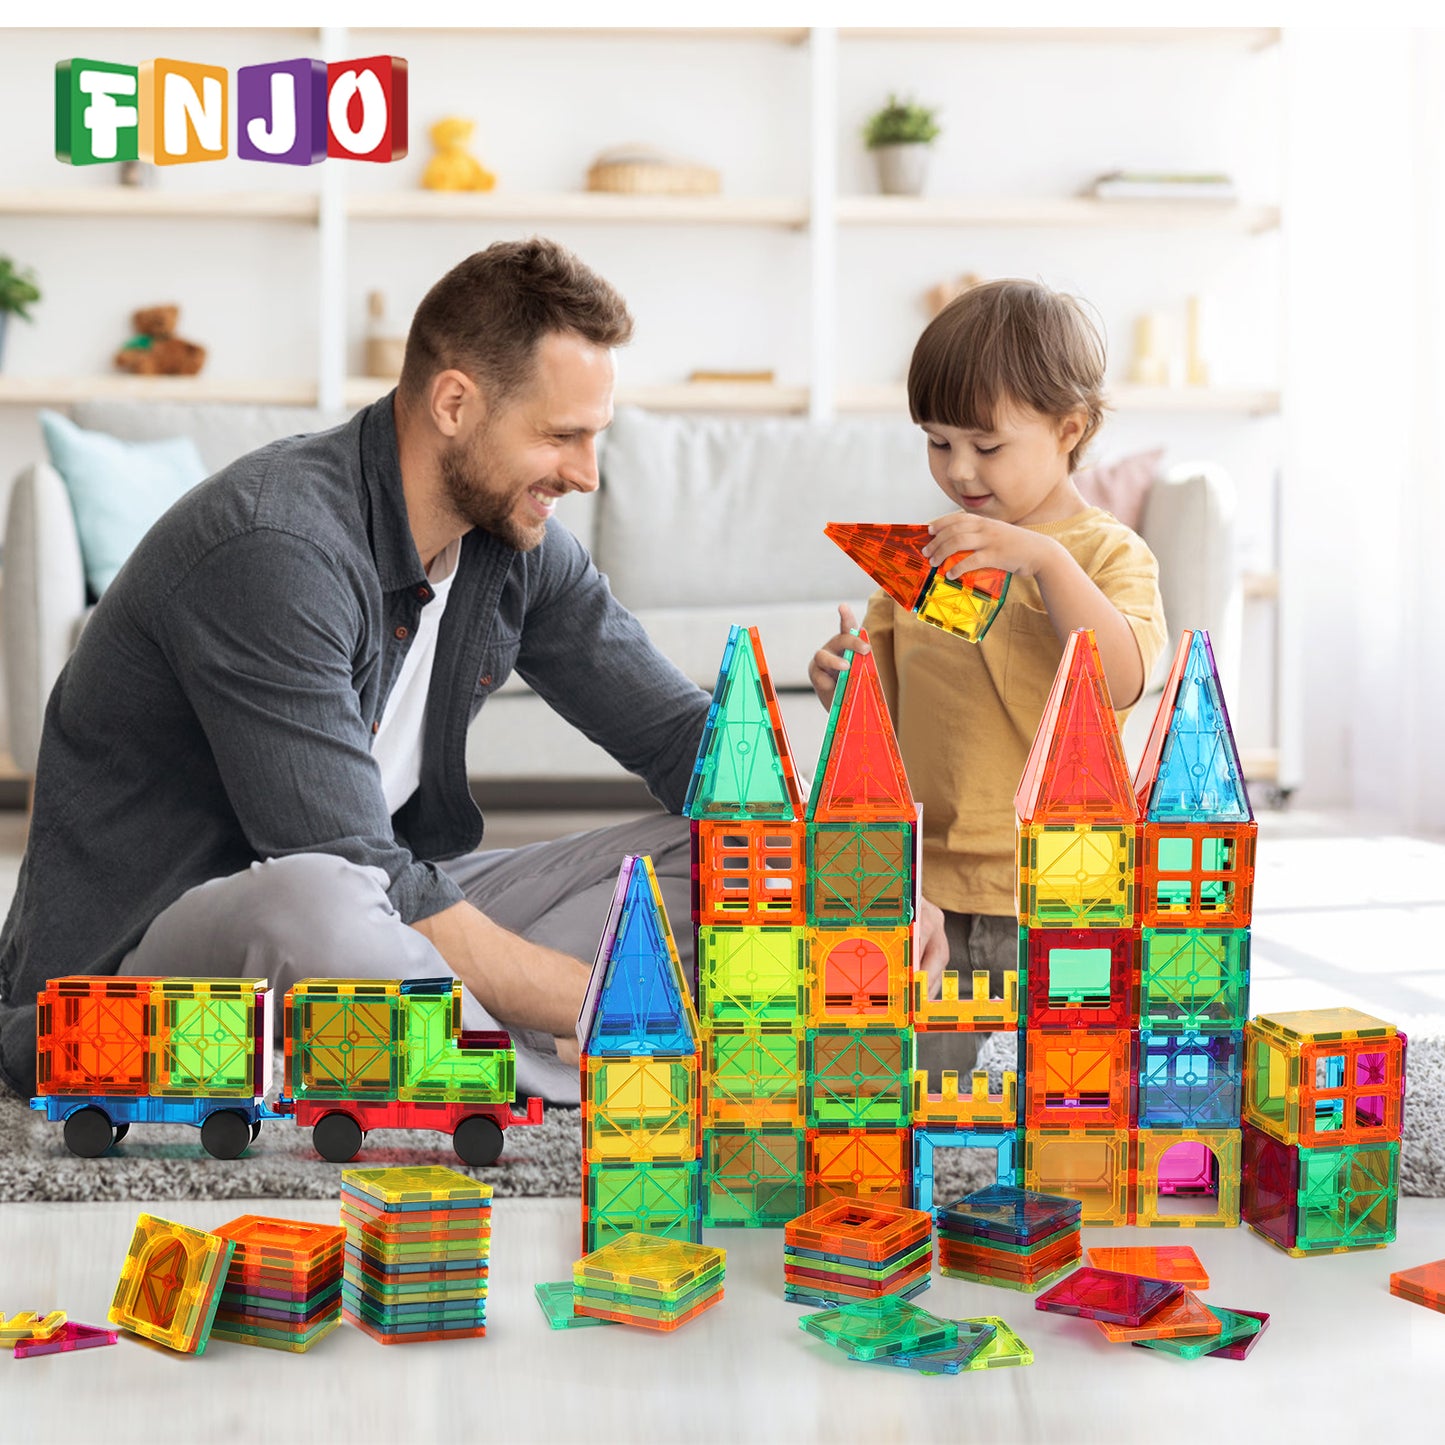 FNJO Magnetic Car Set, Compatible with Magnetic Tiles, 2 Car Trucks